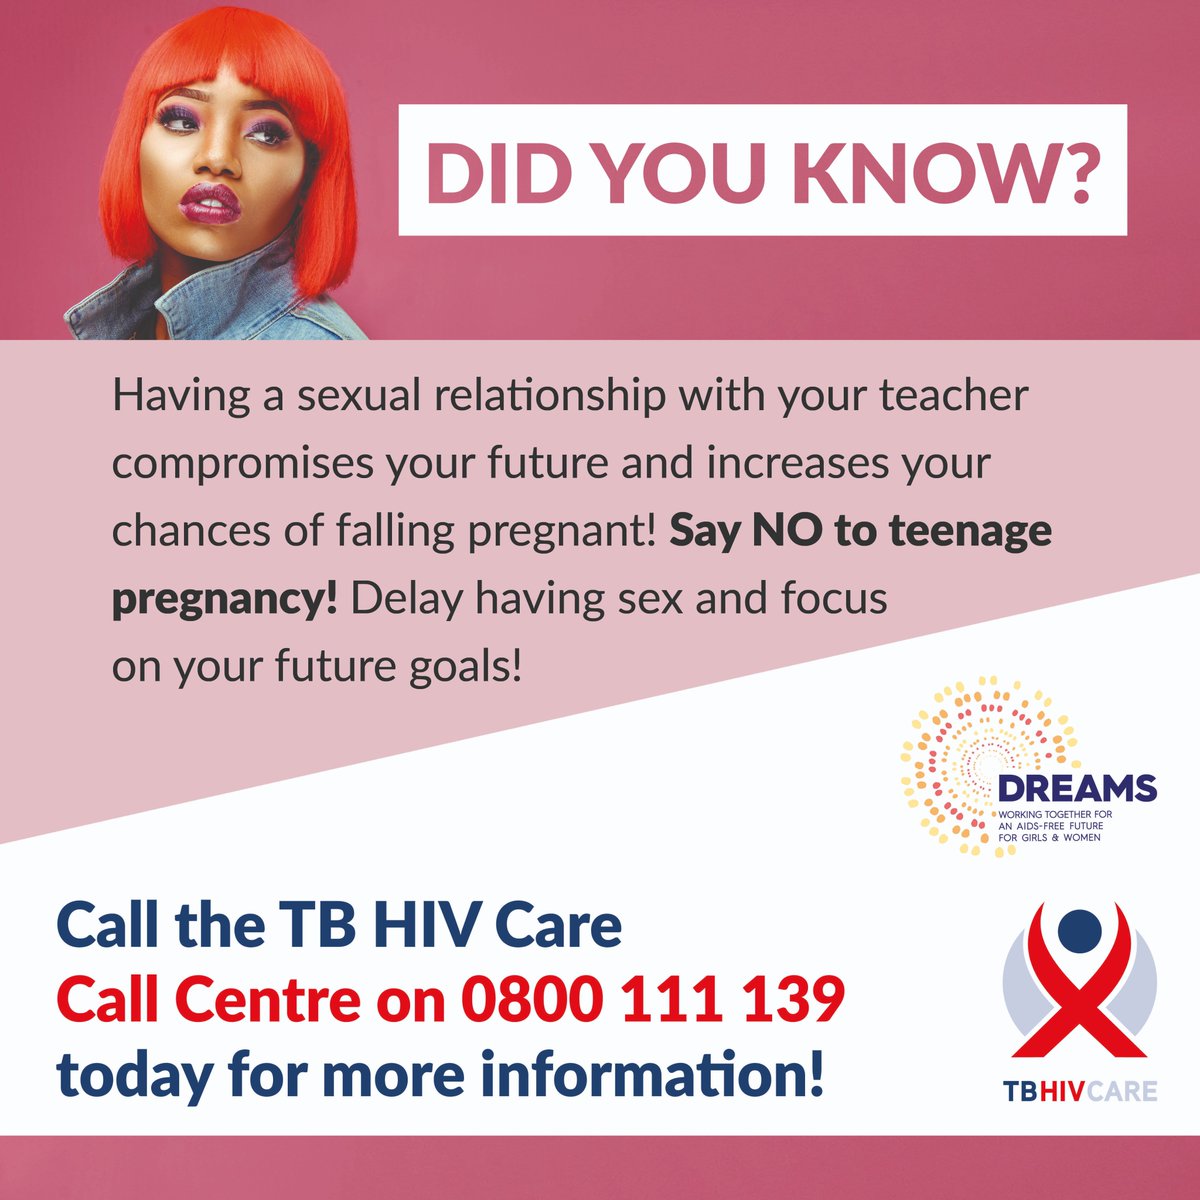 Did you know? Having a sexual relationship with your teacher compromises your future and increases your chances of falling pregnant! Contact the TB HIV Care Call Centre on 0800 111 139 to speak to one of our agents. #didyouknow #empowerment #support #zimisele